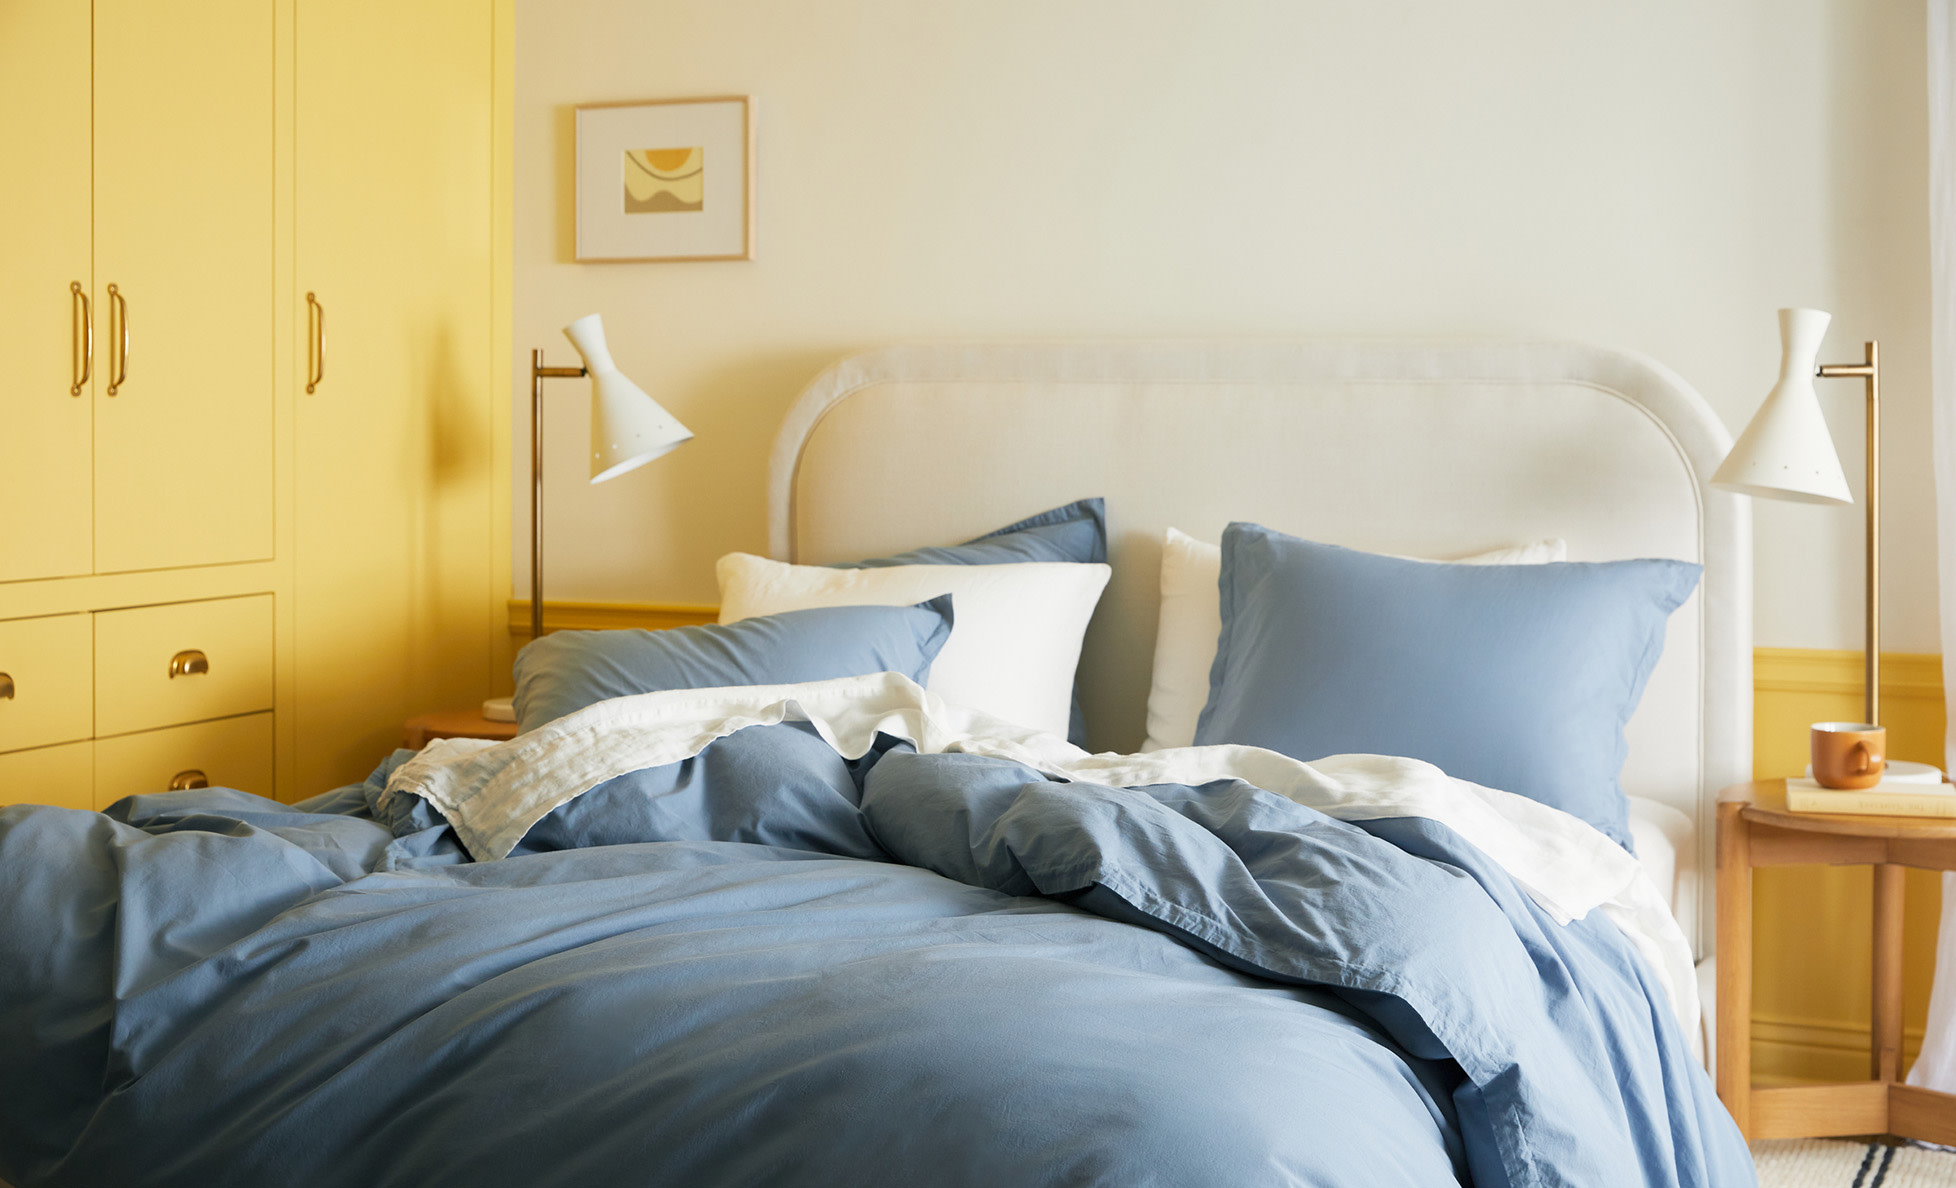 A bright blue bed with modern table lamps